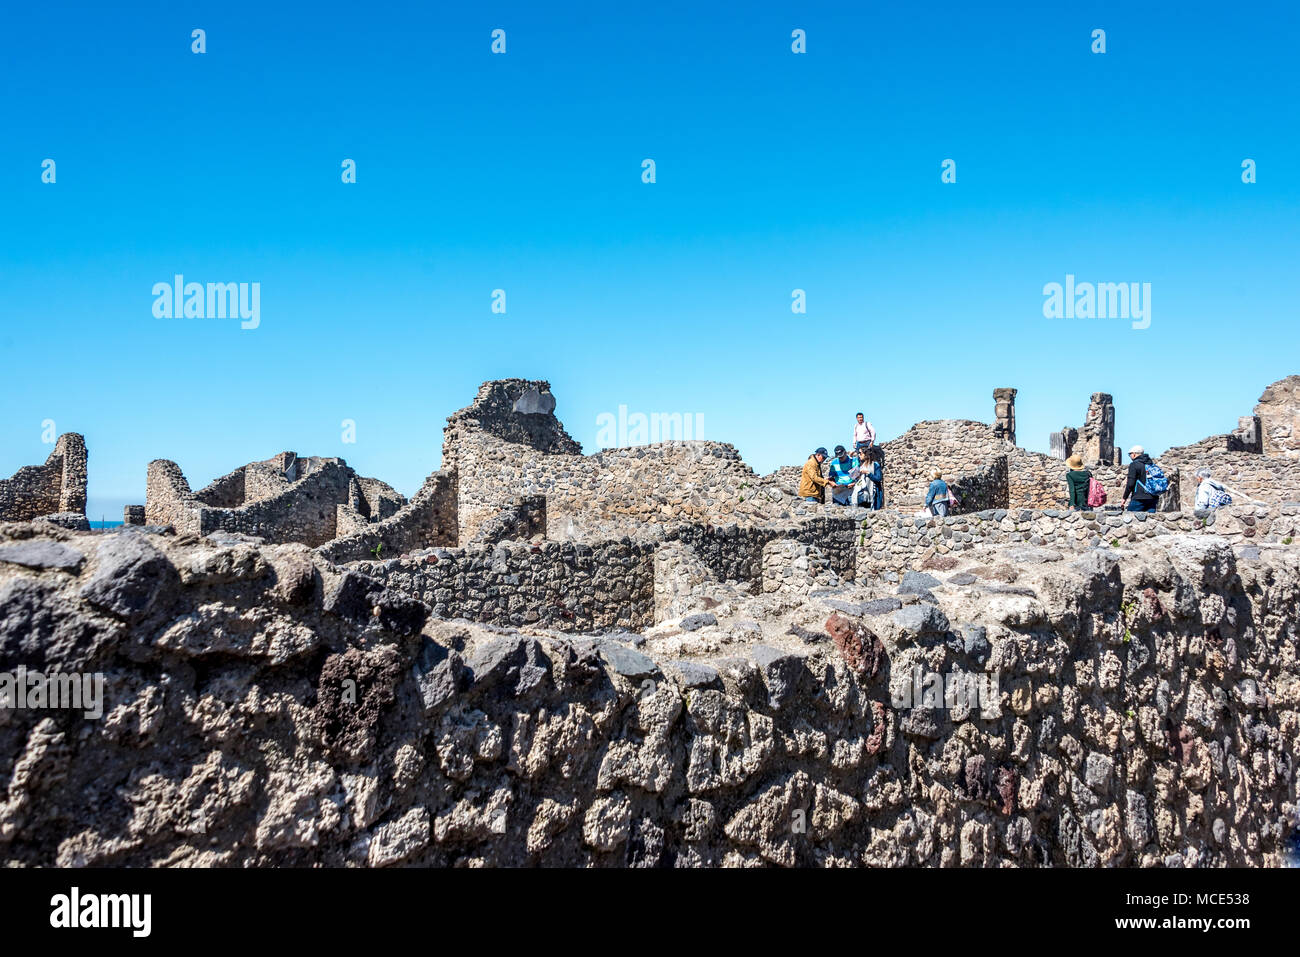 Tourists explore a section of Pompeii city ruins facing the Mediterranean, above the original  port, when the sea was once much closer; exposed walls. Stock Photo